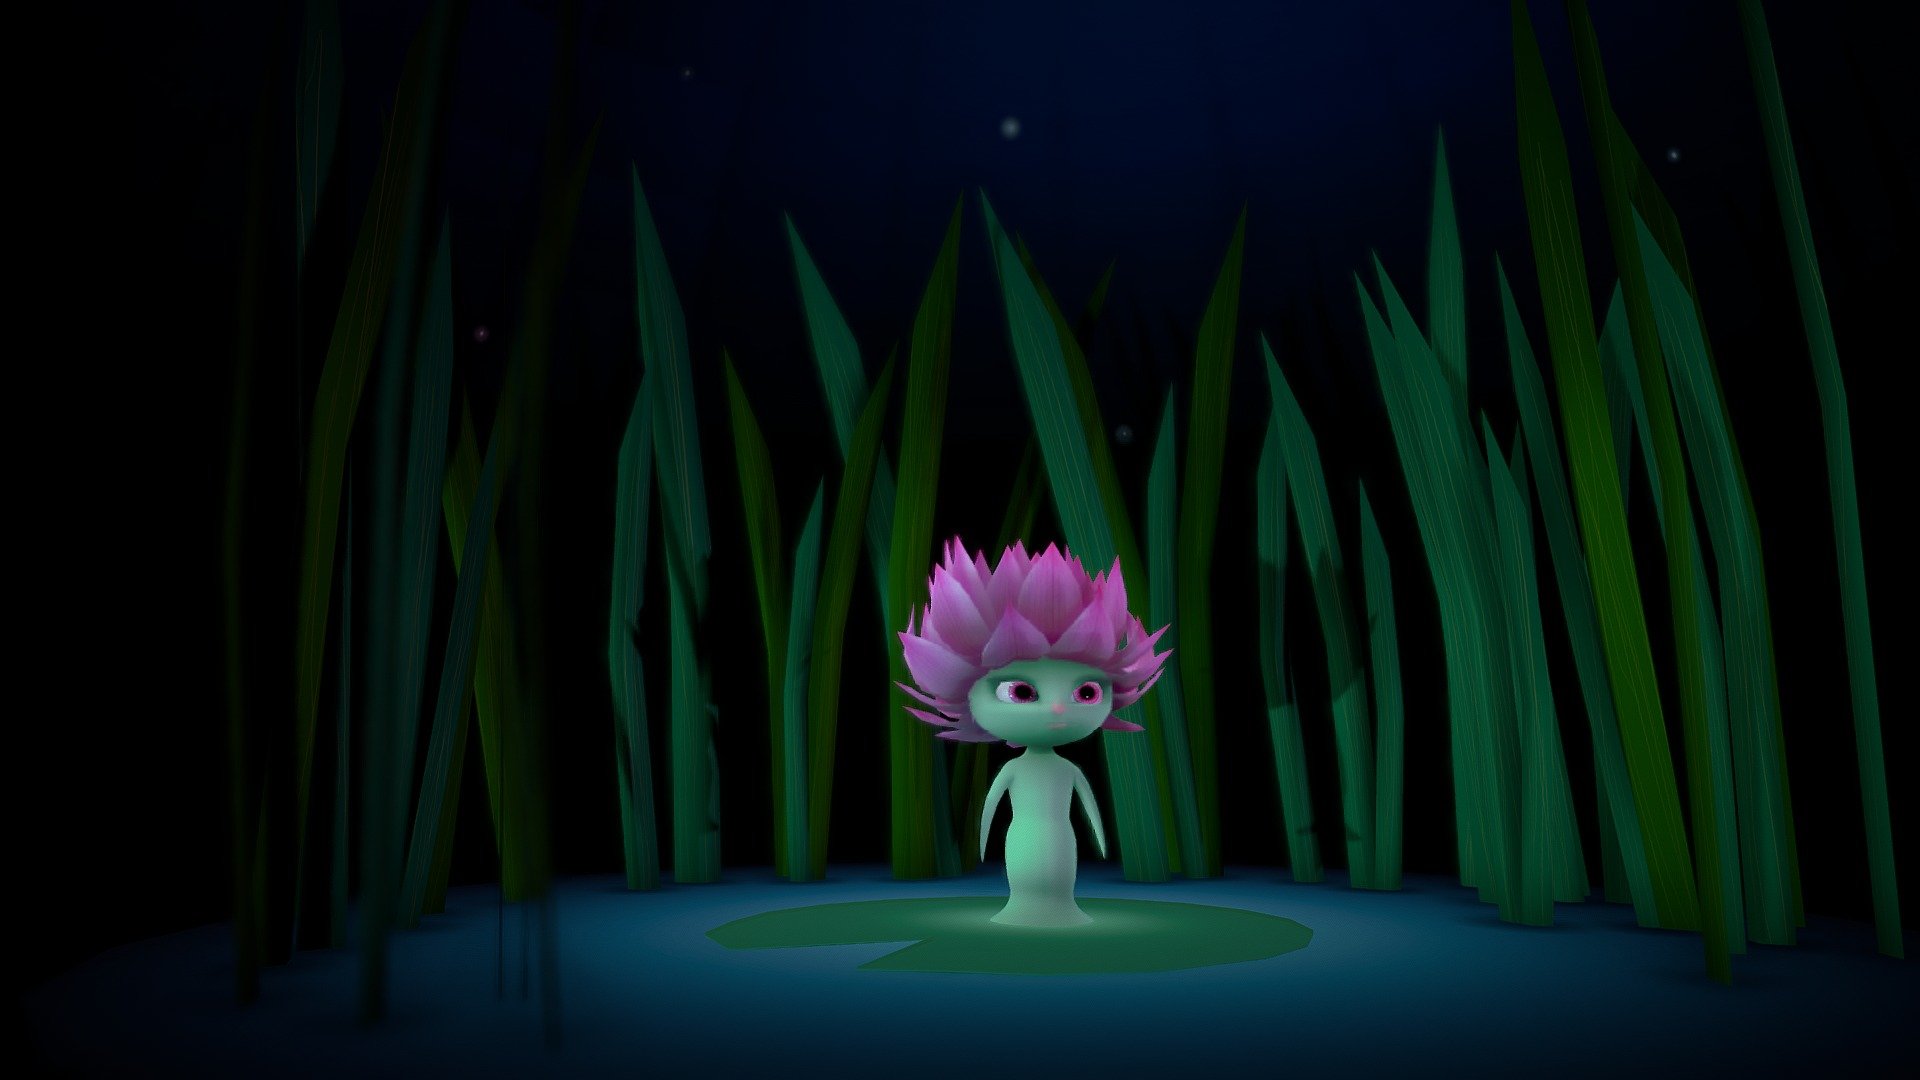 A little personal project. A Waterlilly or Lotus Fairy/ gnome at night. 
Low-poly and real-time ready.
The idle animation was just quickly done to give the scene a bit more life. Might add more later.

I am still a bloody beginner to rigging. (this is actually the third creature I've rigged so far. It's pretty frustrating, but I assume there'll be a better understanding of the whole technical process with every rig&hellip;(at least I hope so :'D ) - Water Lilly - 3D model by Ray (@rayro) 3d model